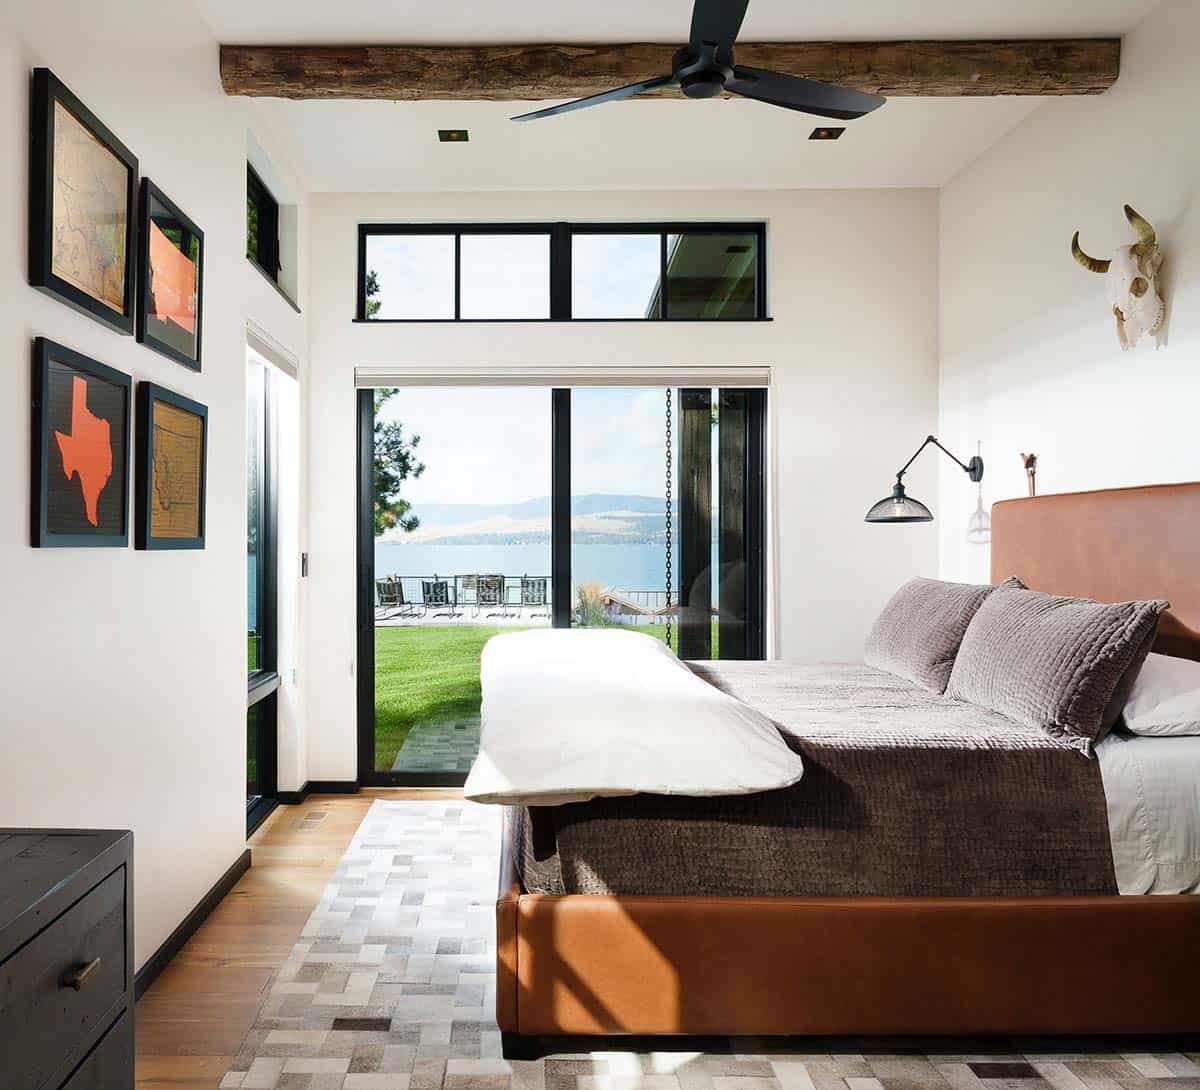 rustic modern bedroom with a sliding door access to the backyard and lake